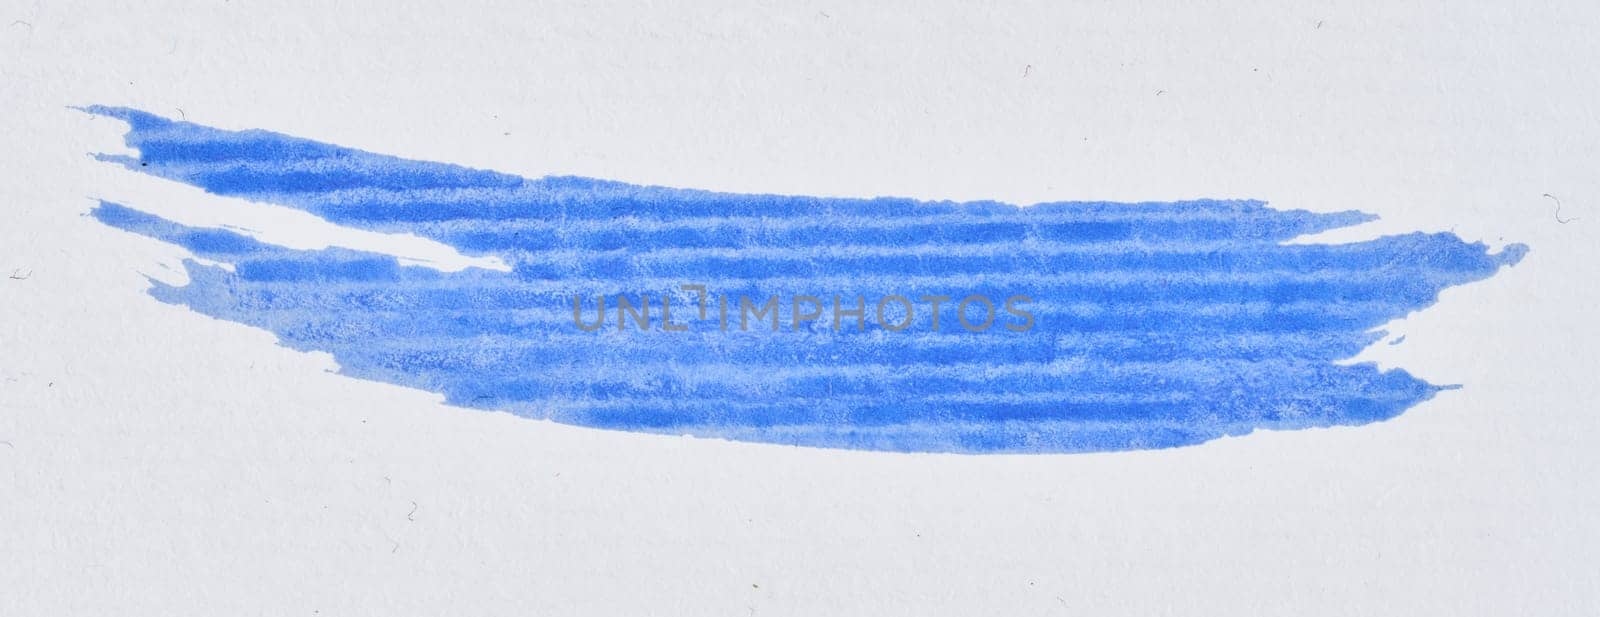 Watercolor brush stroke of blue paint, on a white  background by ndanko